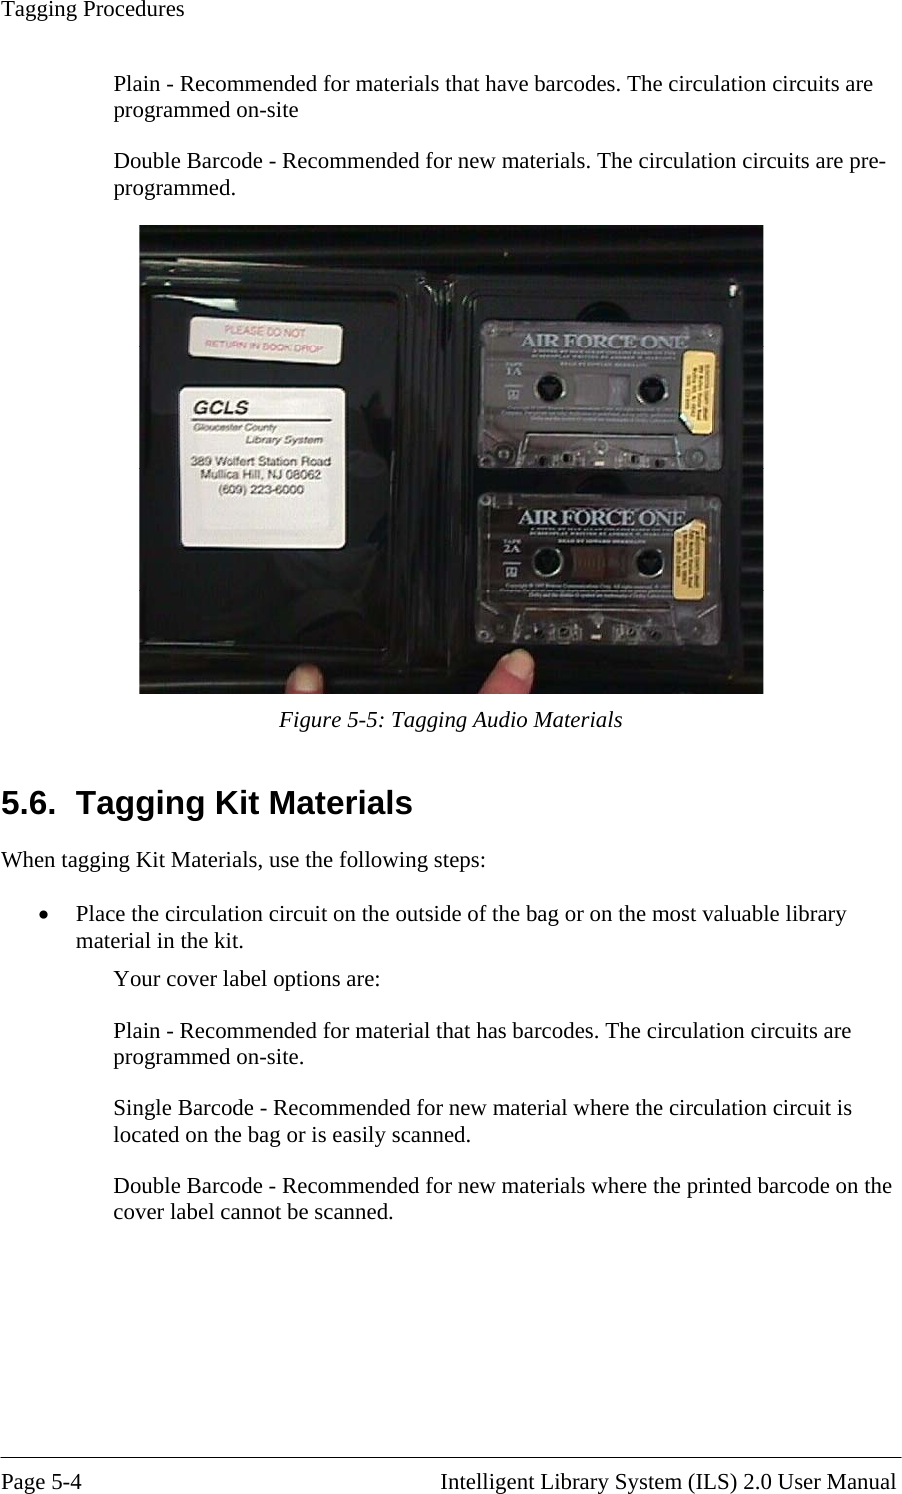 Tagging Procedures Plain - Recomprogrammed mended for materials that have barcodes. The circulation circuits are  on-site The circulation circuits are pre-Double Barcode - Recommended for new materials. programmed.   Figure 5-5: Tagging Audio Materials gging Kit Materials When ta culation circuit on the outside of the bag or on the most valuable library Your cover label options are:  new material where the circulation circuit is ed.  5.6.  Tagging Kit Materials, use the following steps: •  Place the cirmaterial in the kit. Plain - Recommended for material that has barcodes. The circulation circuits are programmed on-site. Single Barcode - Recommended forlocated on the bag or is easily scannDouble Barcode - Recommended for new materials where the printed barcode on thecover label cannot be scanned.   Page 5-4                                                       Intelligent Library System (ILS) 2.0 User Manual 